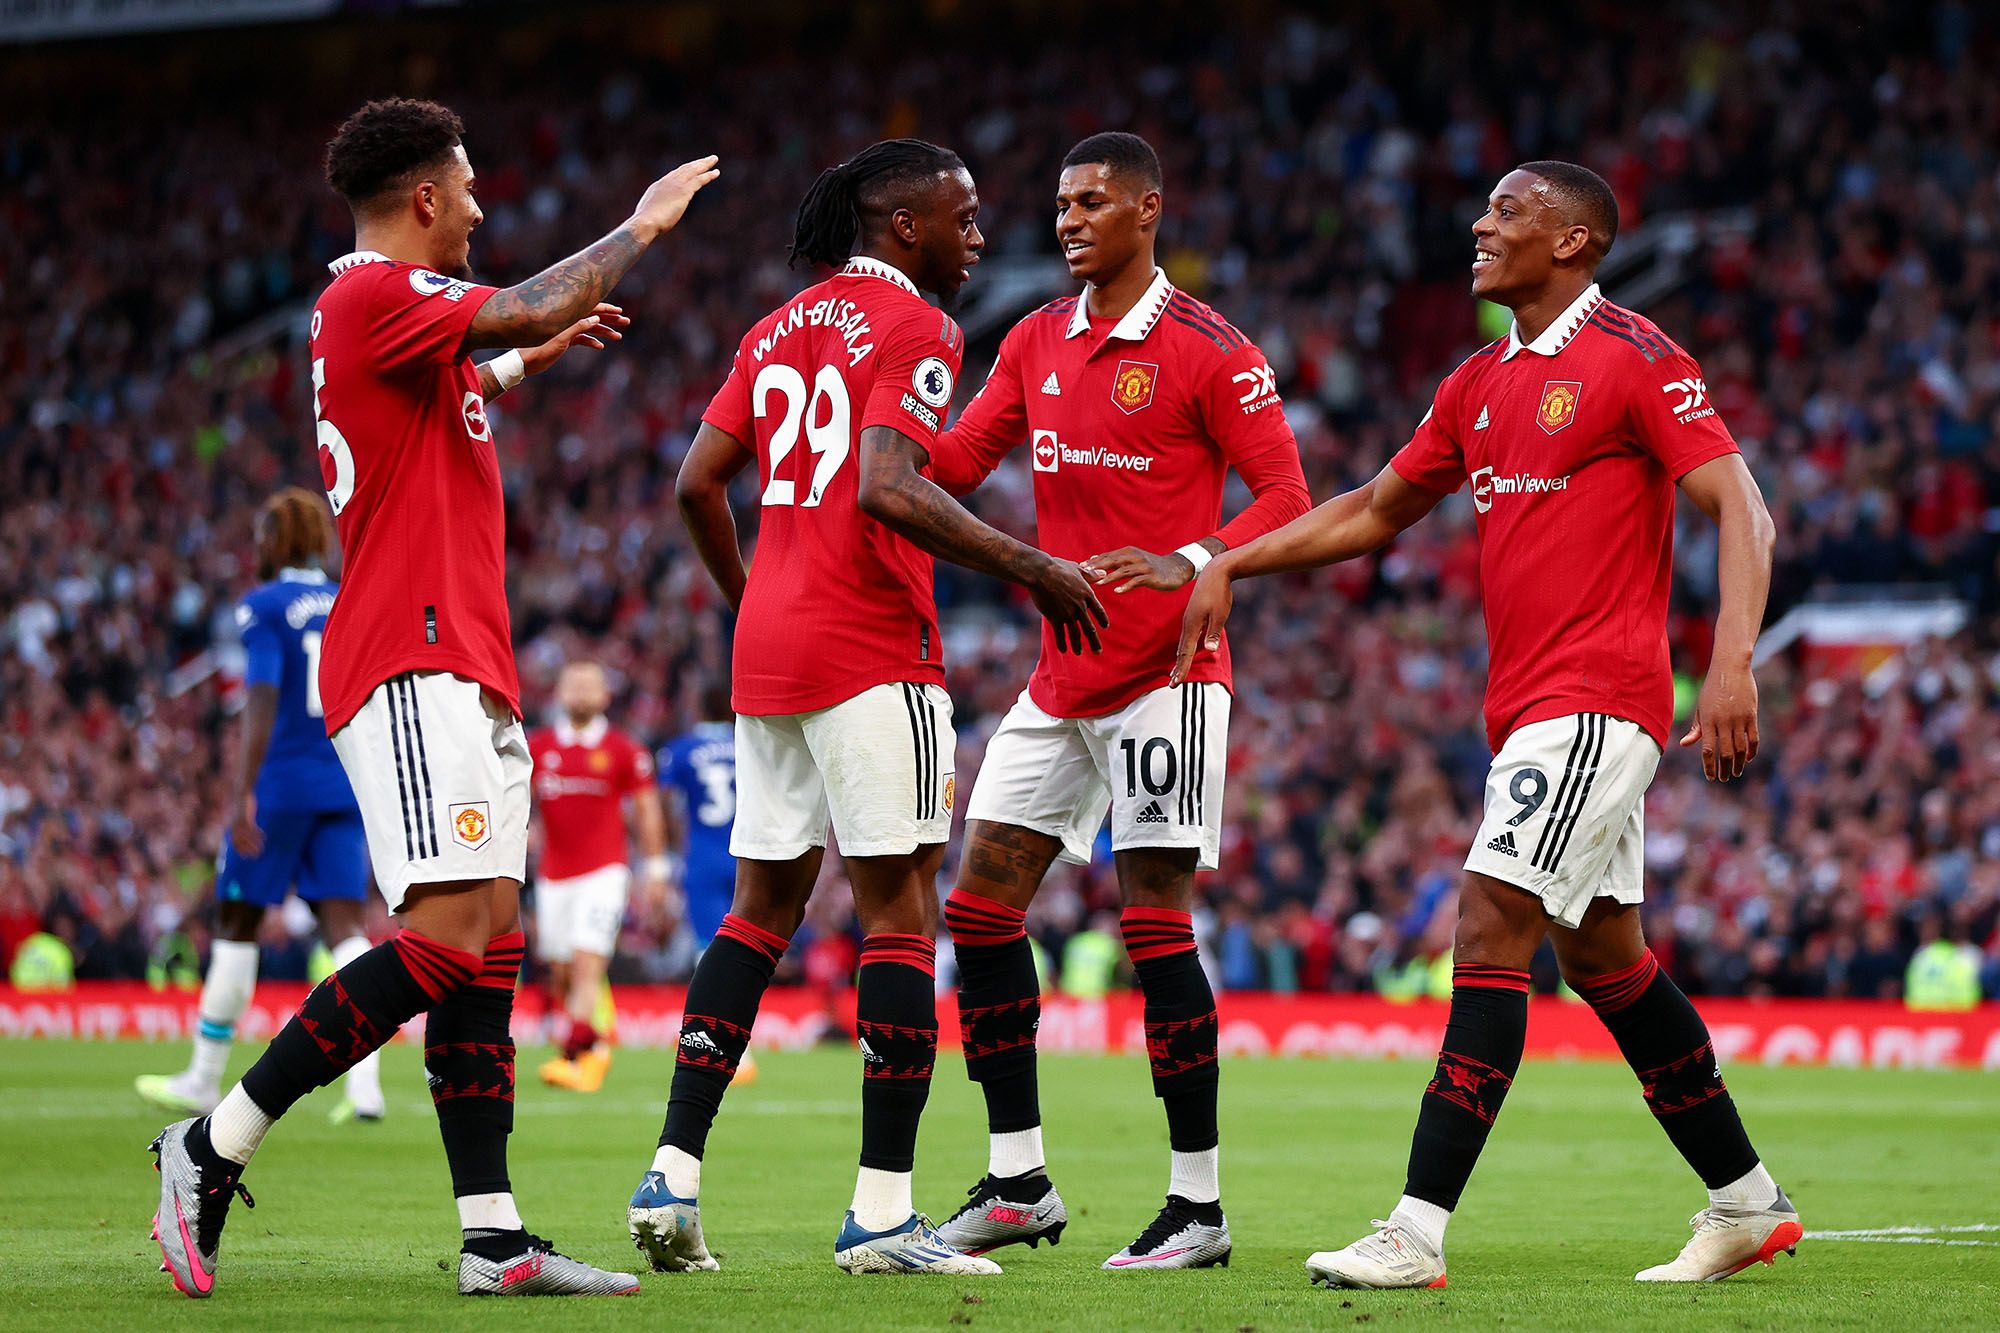 EPL: Manchester United return to Champions League by thumping Chelsea